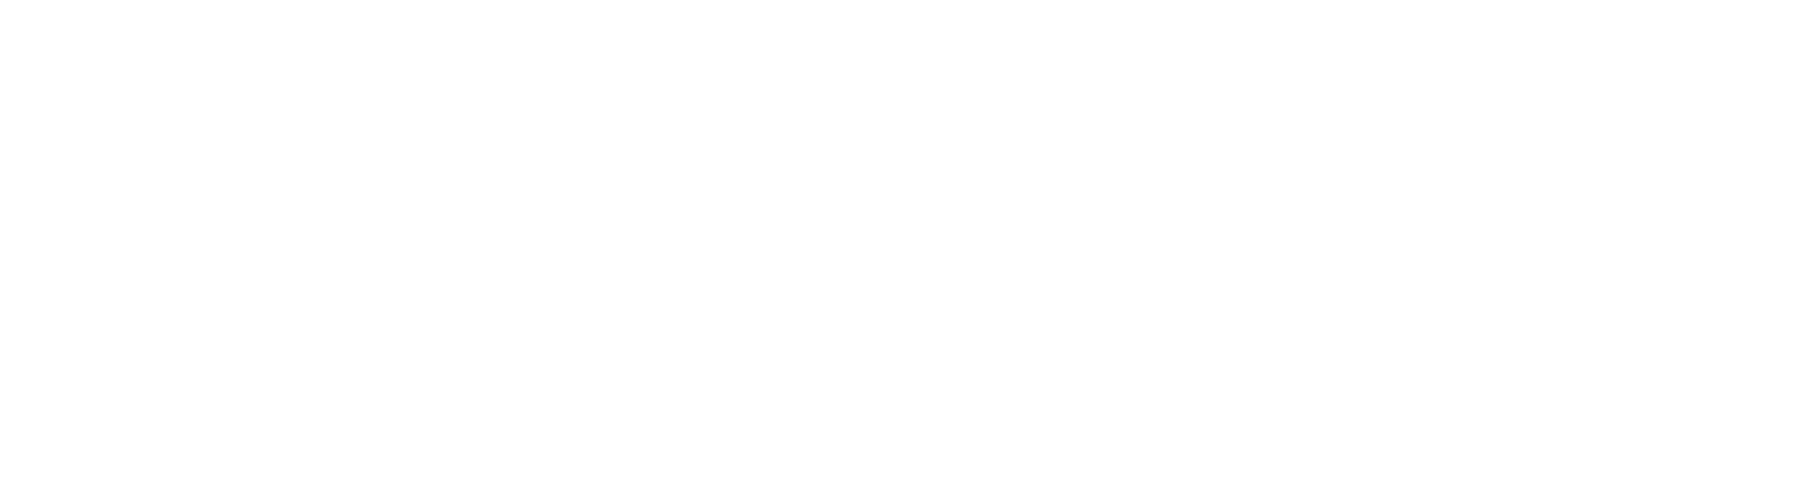 Wicked Lester Records